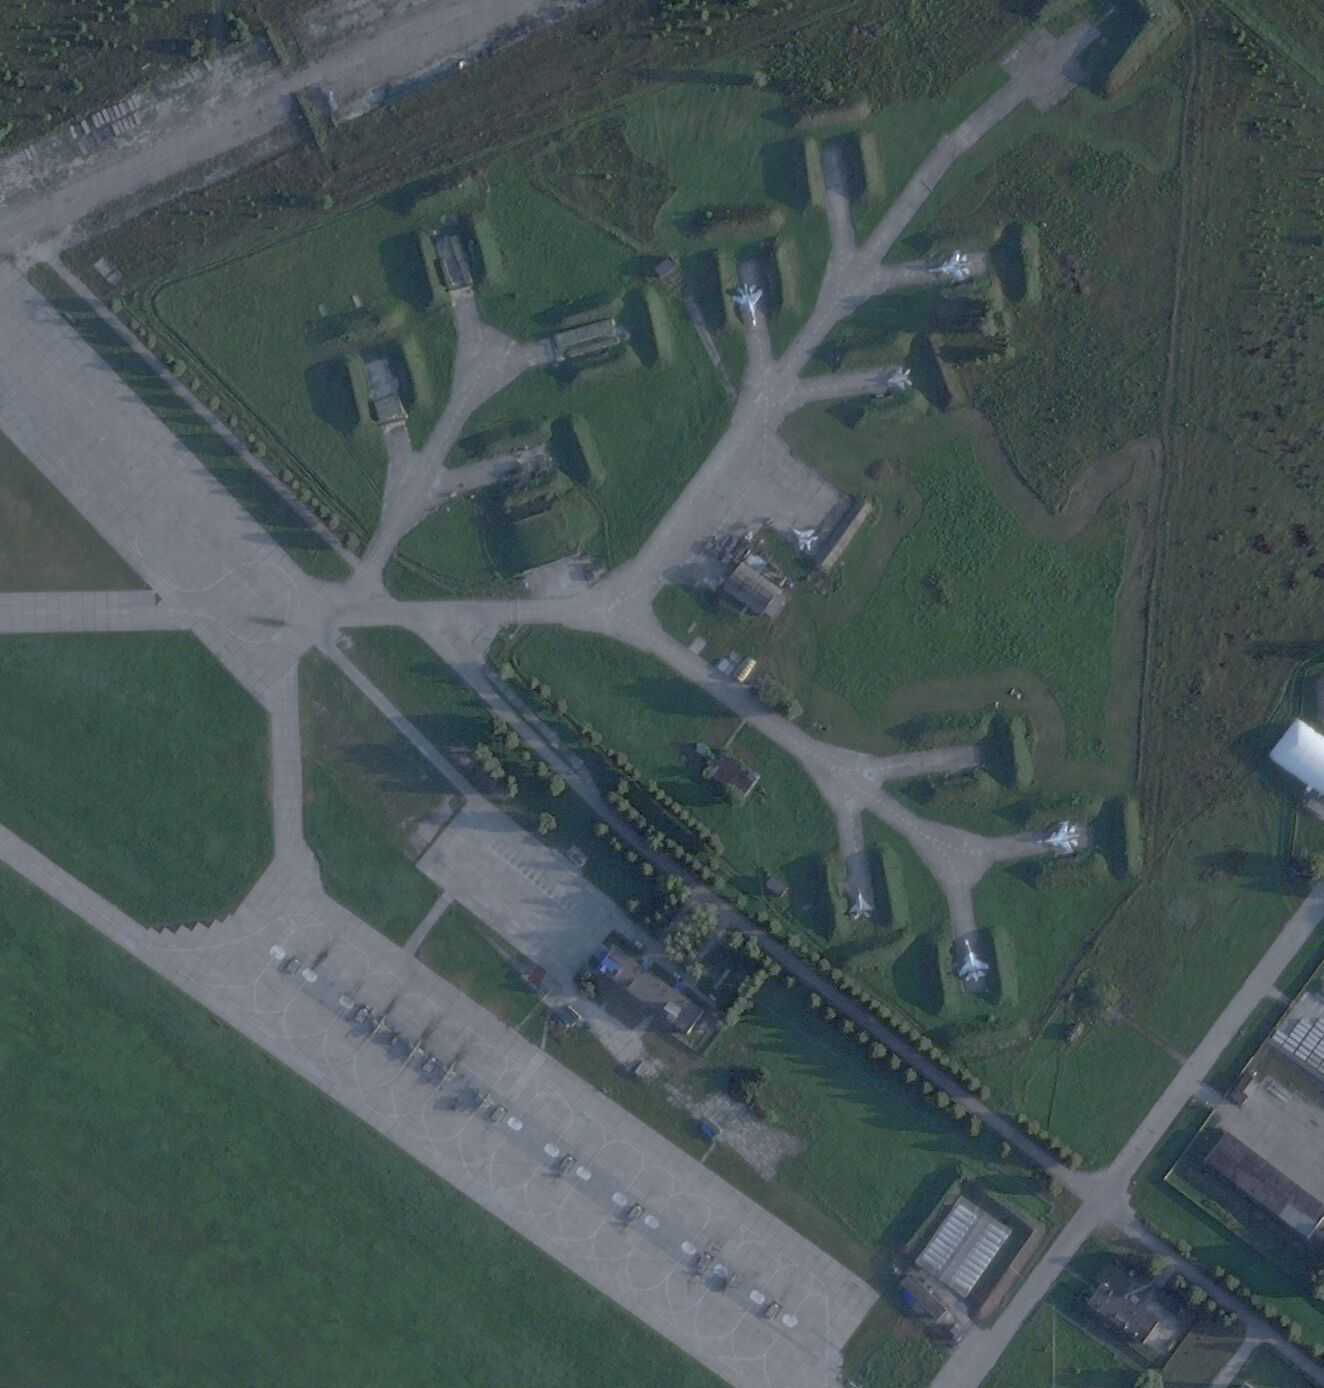 Satellite images of the Kursk airfield after a drone attack by SBU counter-intelligence appear